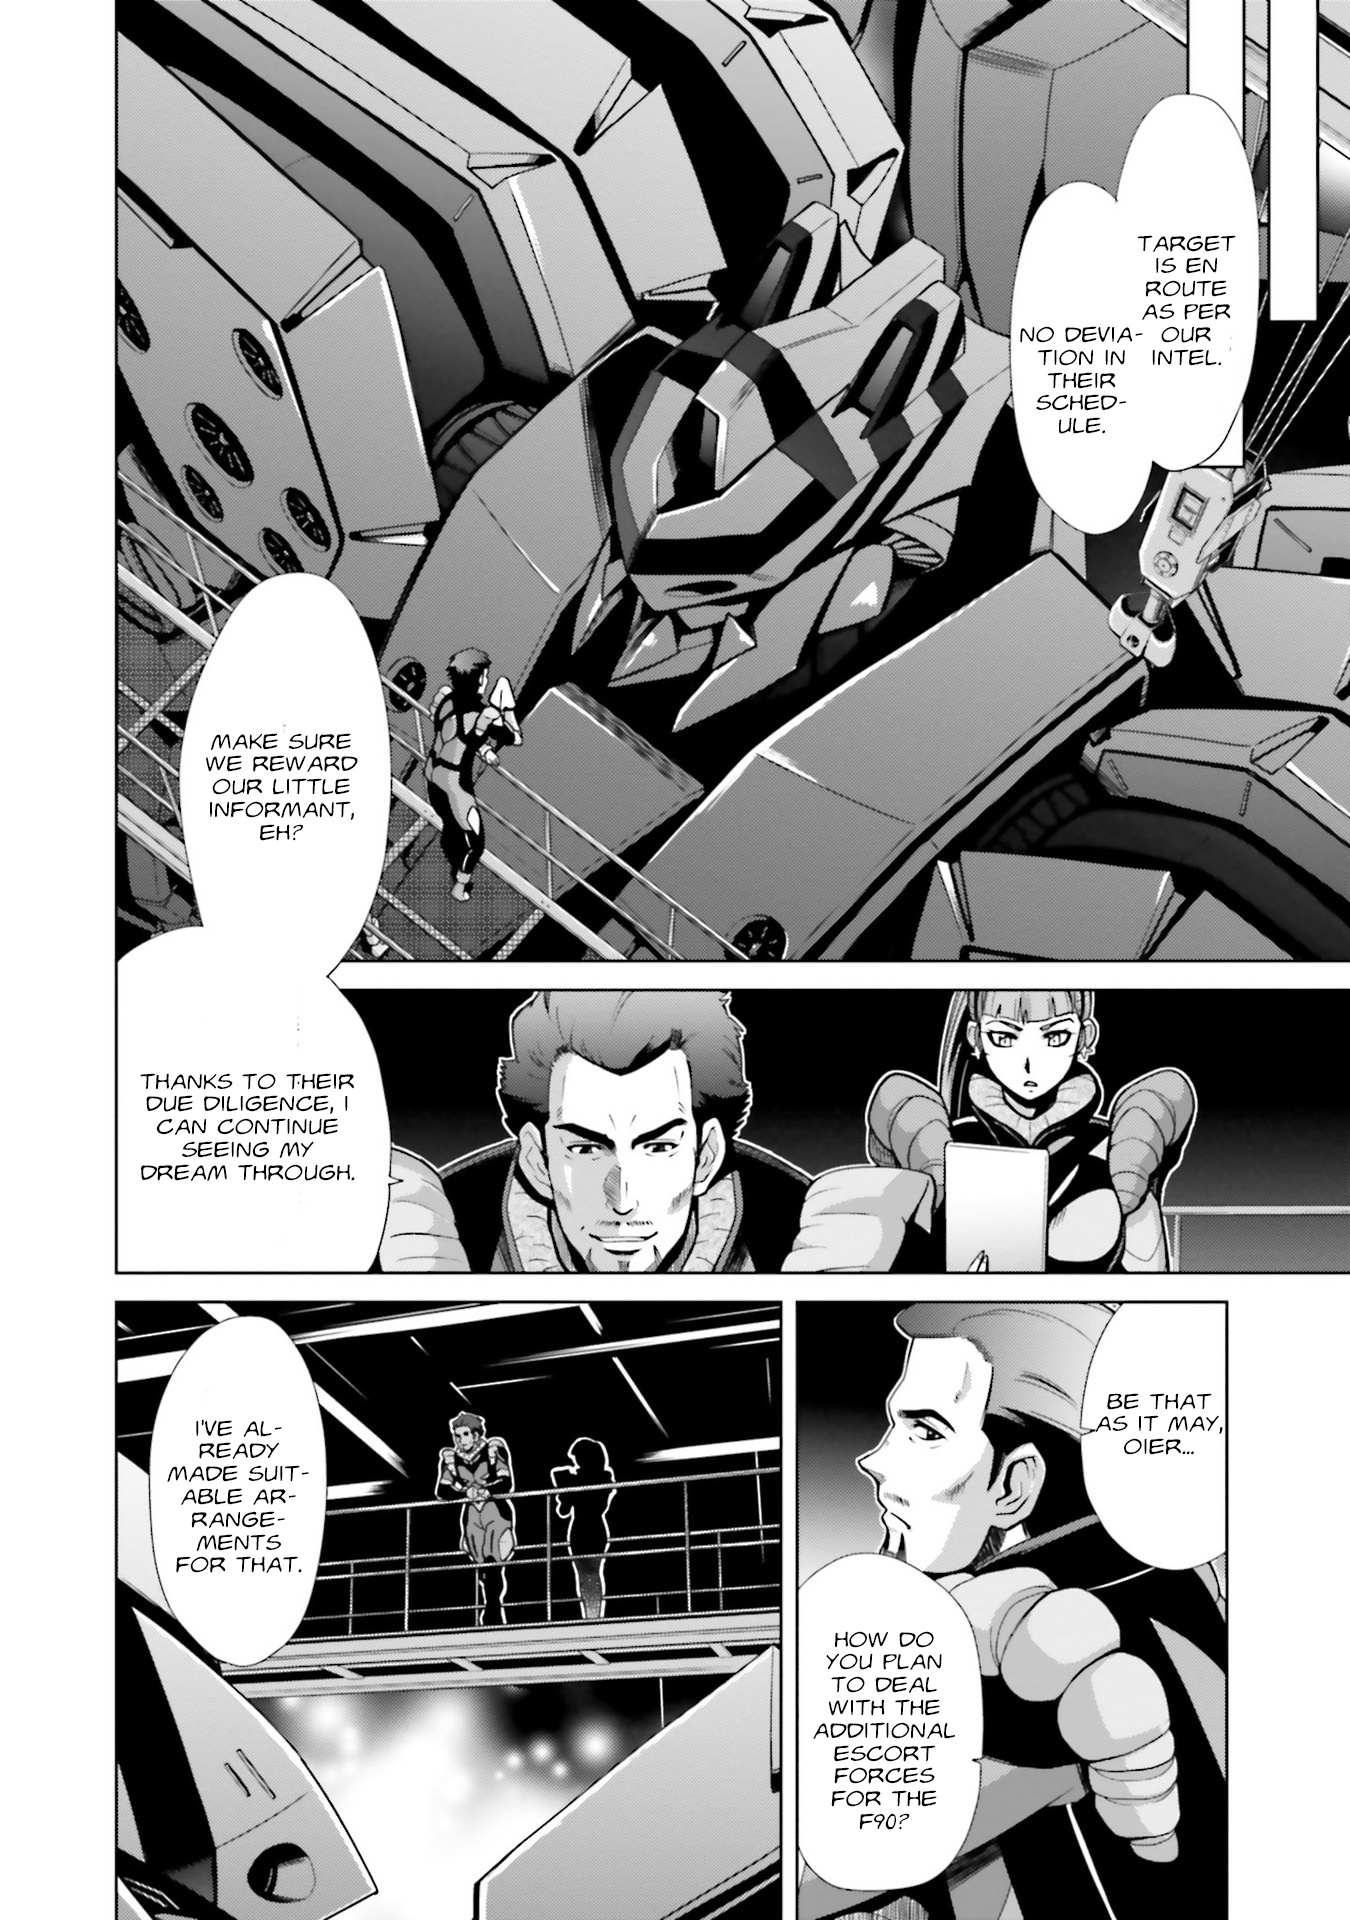 Mobile Suit Gundam F90 FF - chapter 7 - #5